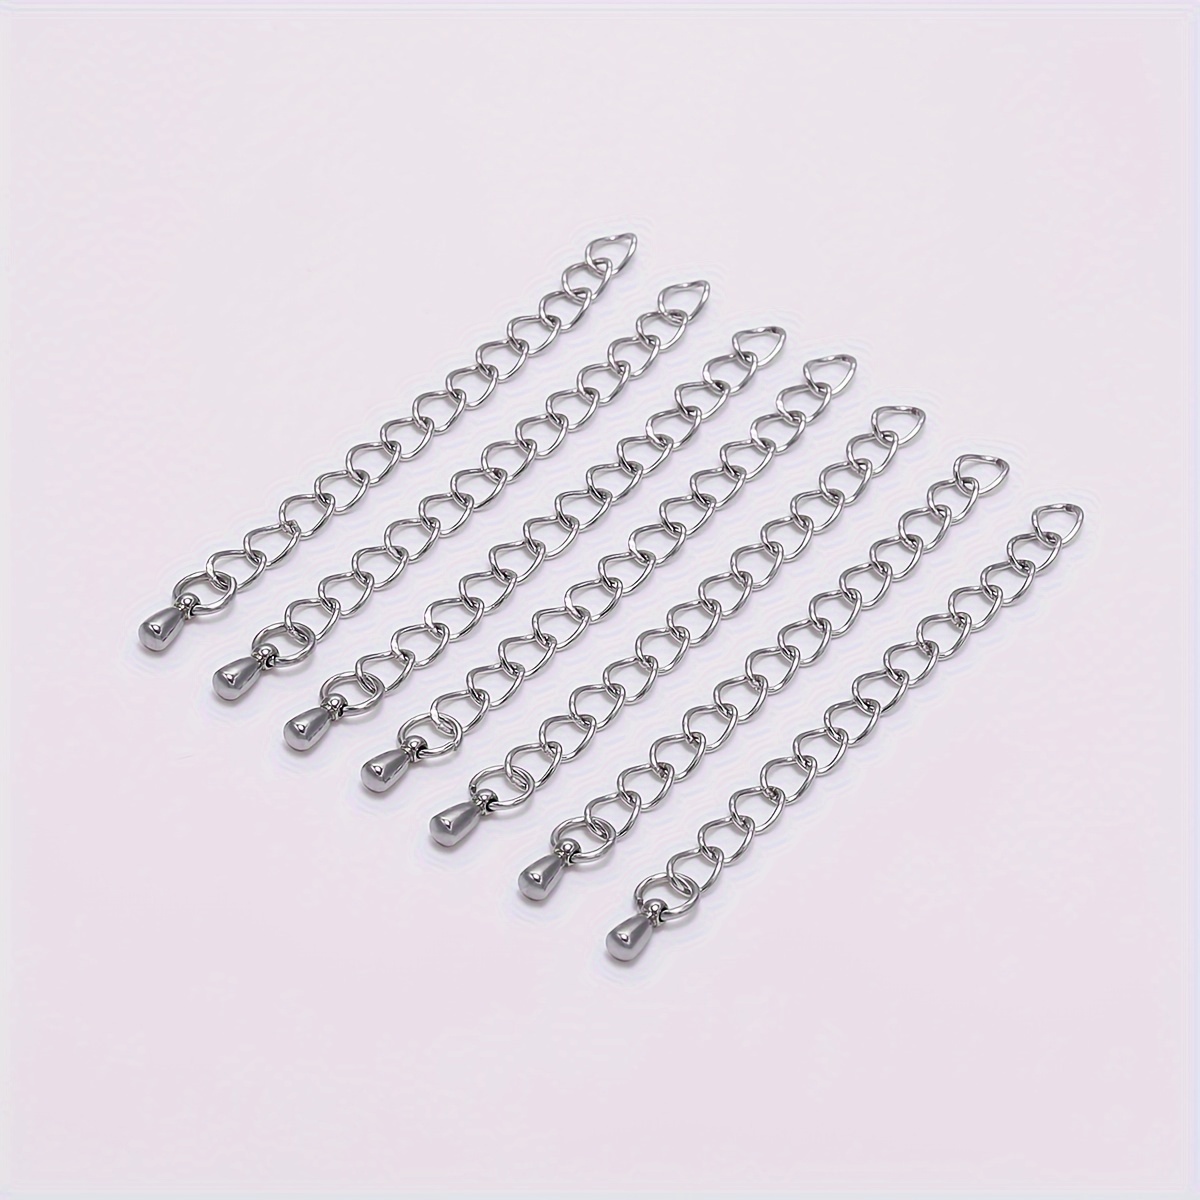  Stainless Steel Necklace Extender Chain Adjustable